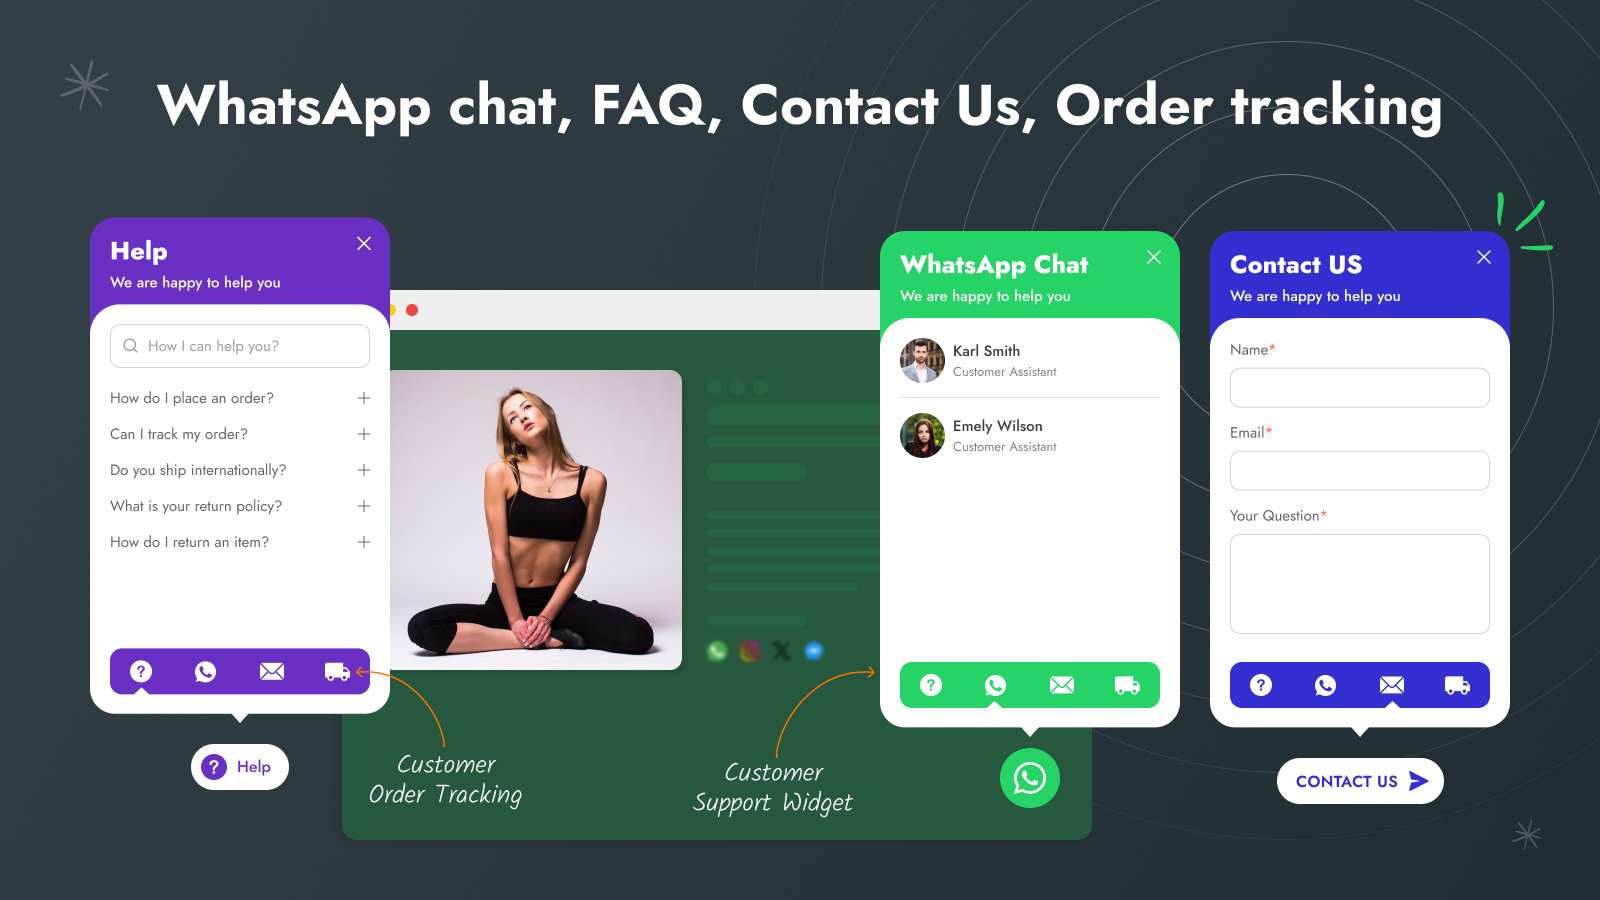 multiple choice for whatsapp chat button, chat, faqs, contact us